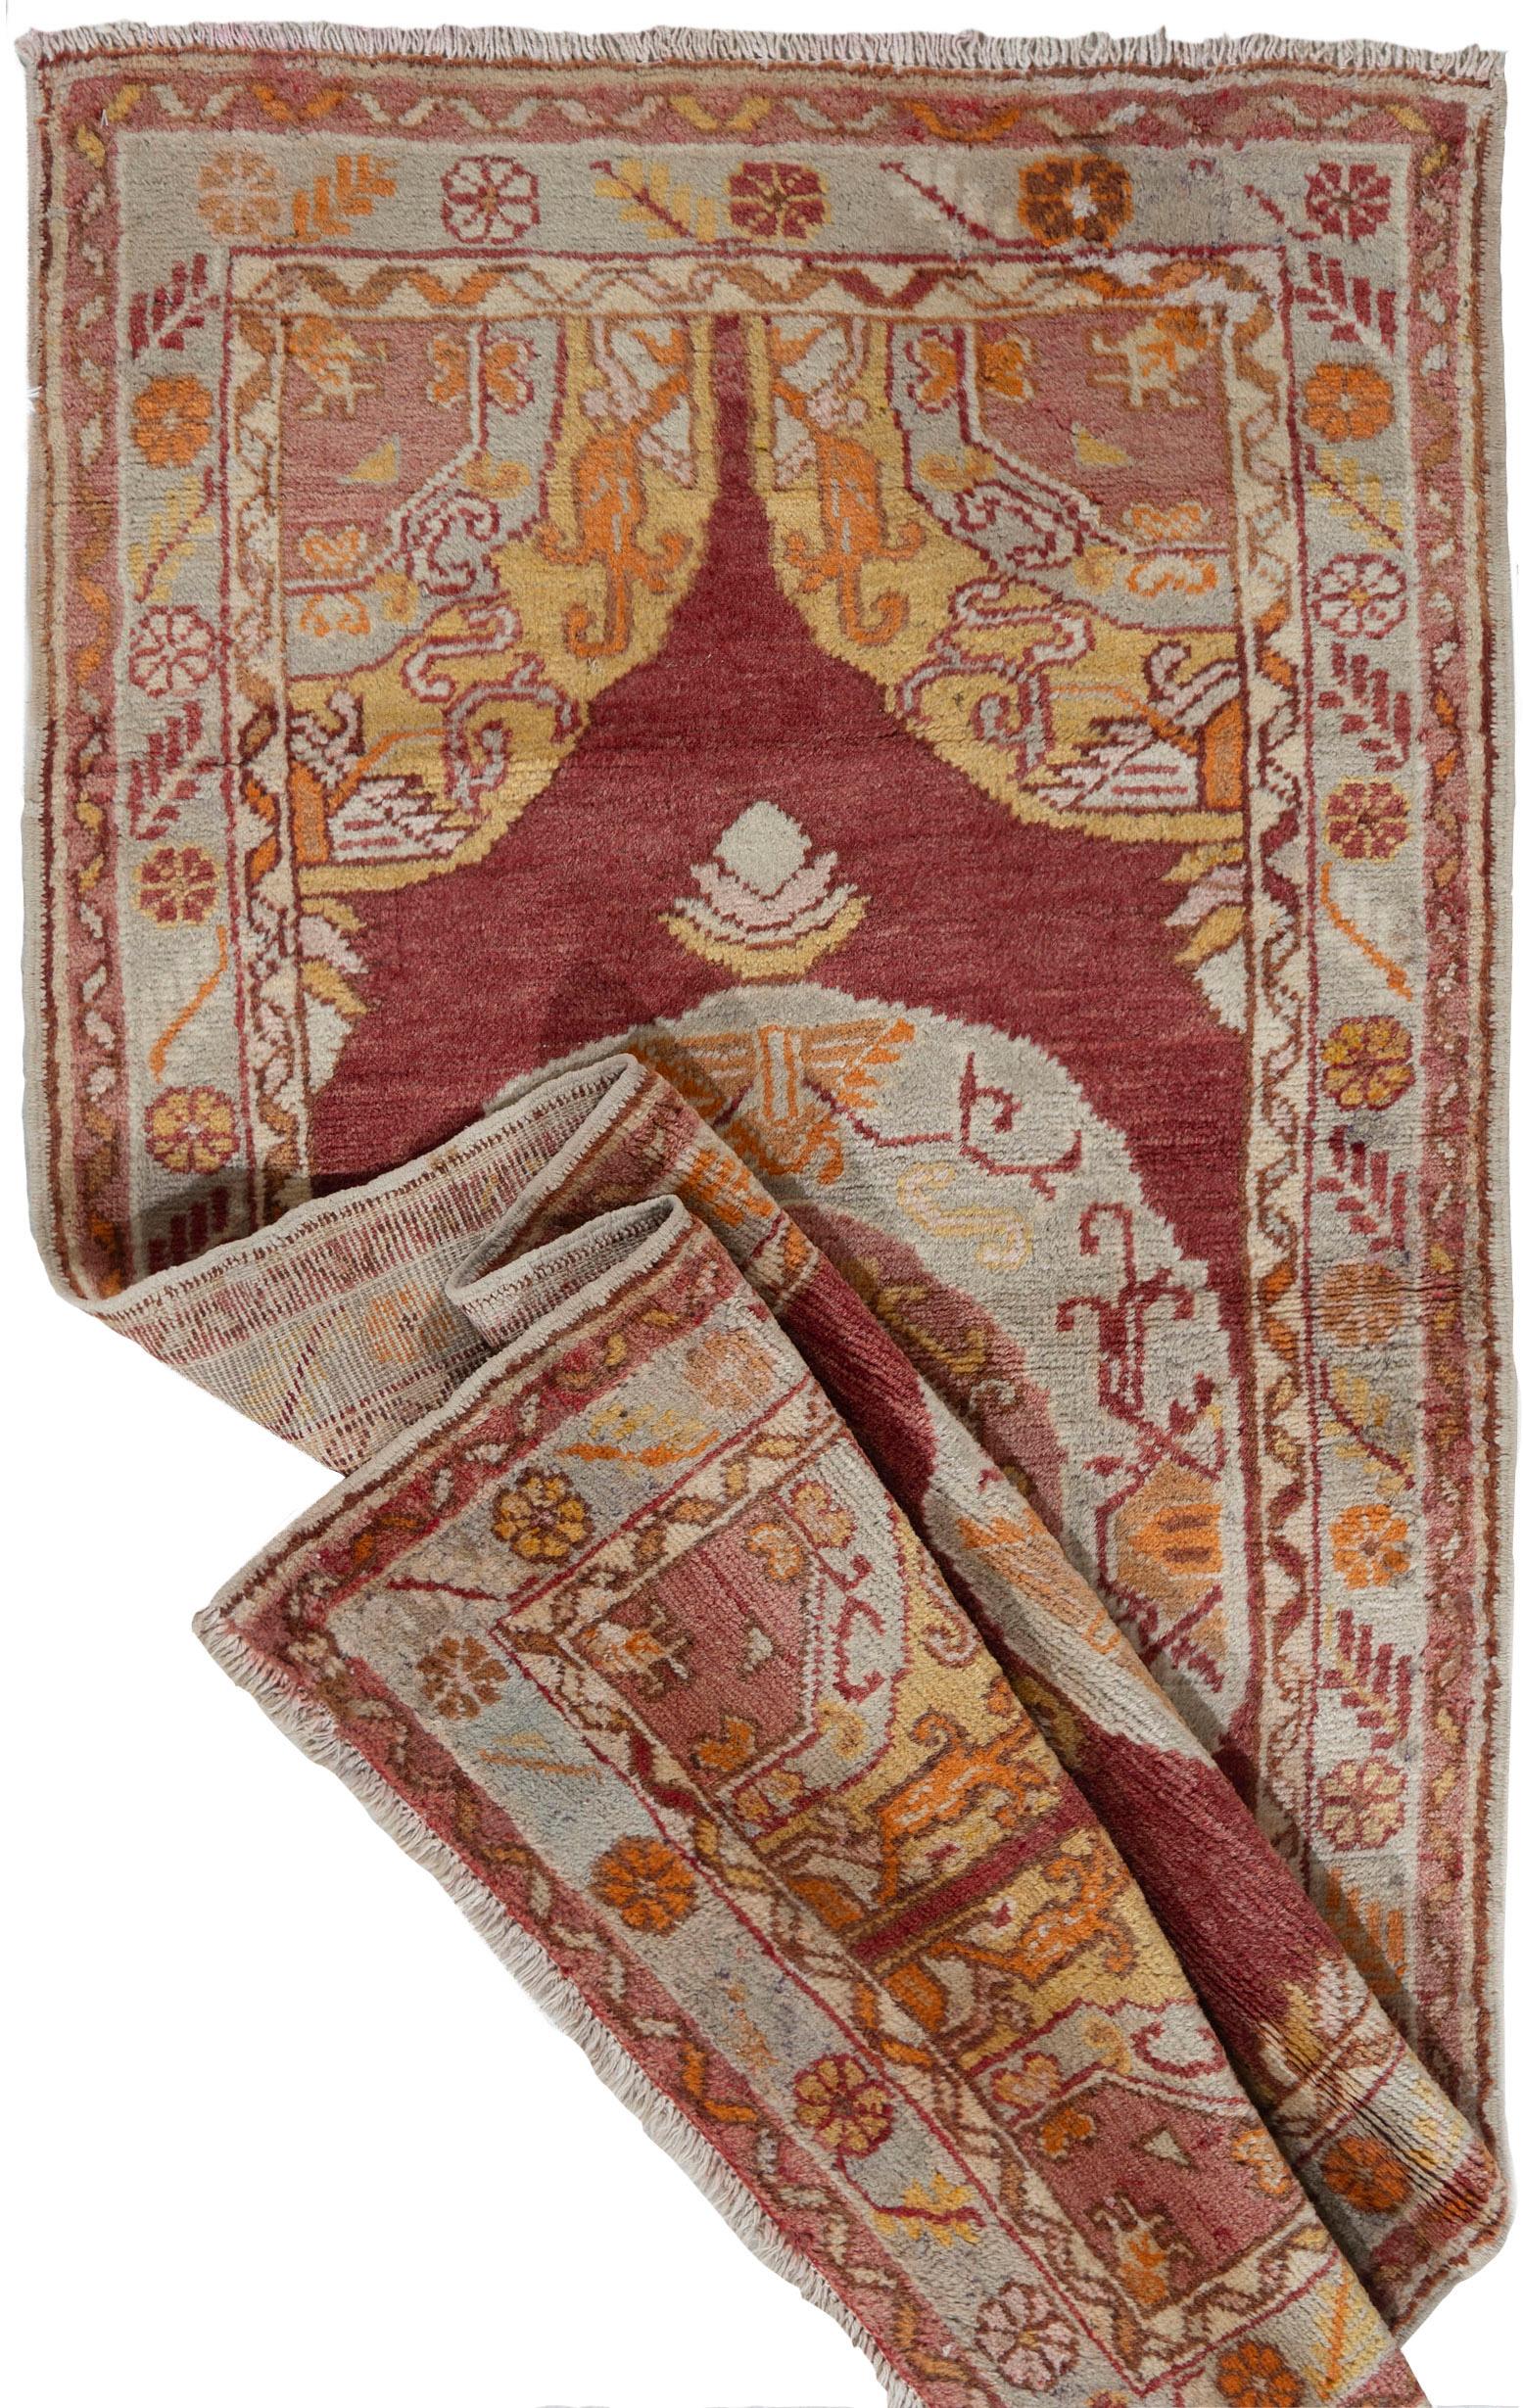 Vintage Turkish Oushak Area Rug 2'6 X 5'3. Oushak's are known for their soft palettes combined with eccentric drawing. Oushak in western Turkey has the longest continuous rug weaving history, stretching back at least to the mid-fifteenth century. It